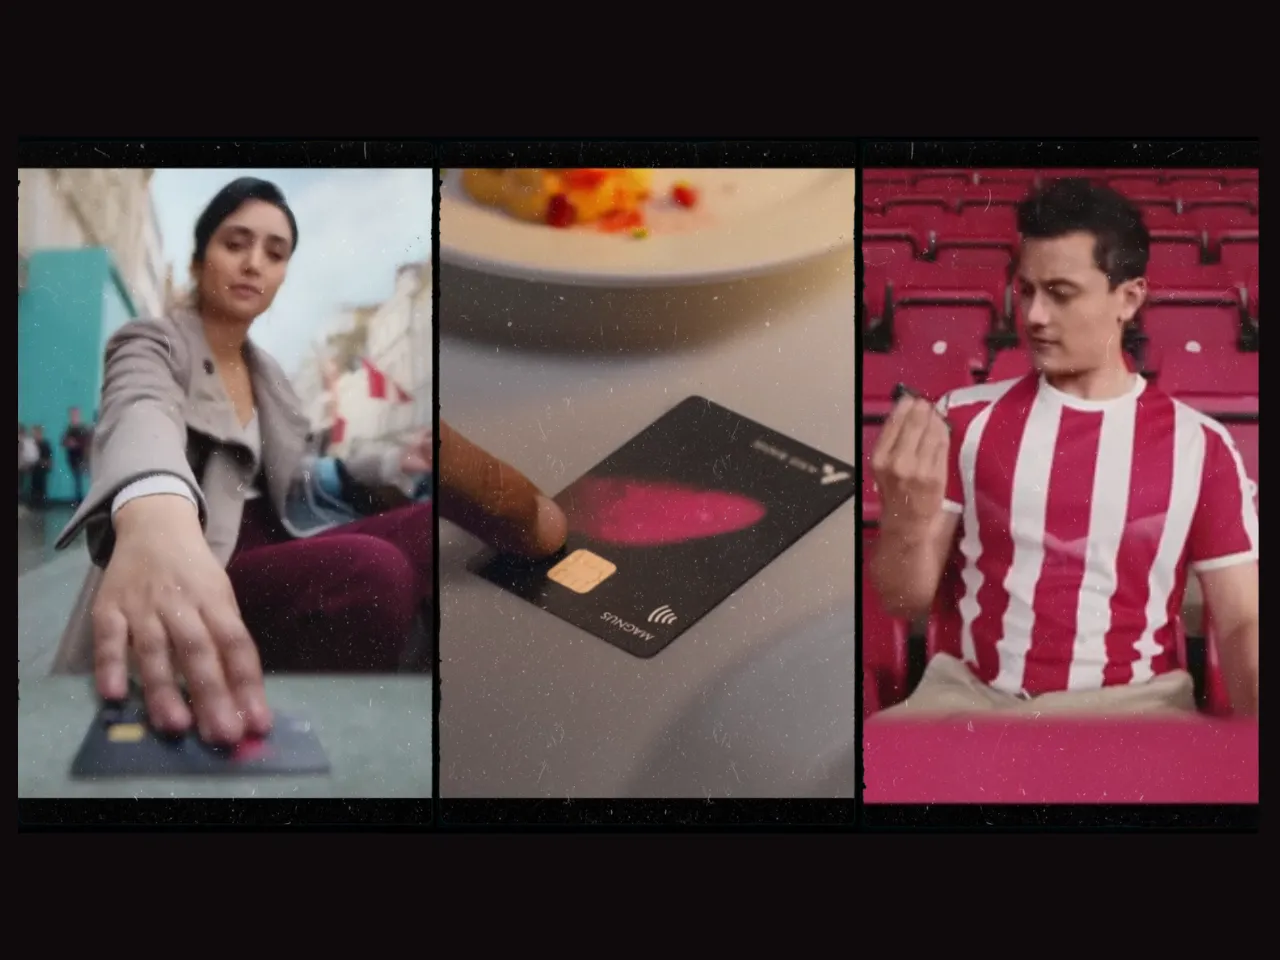 Axis Bank’s new campaign reveals reasons why influencers disappeared from social media